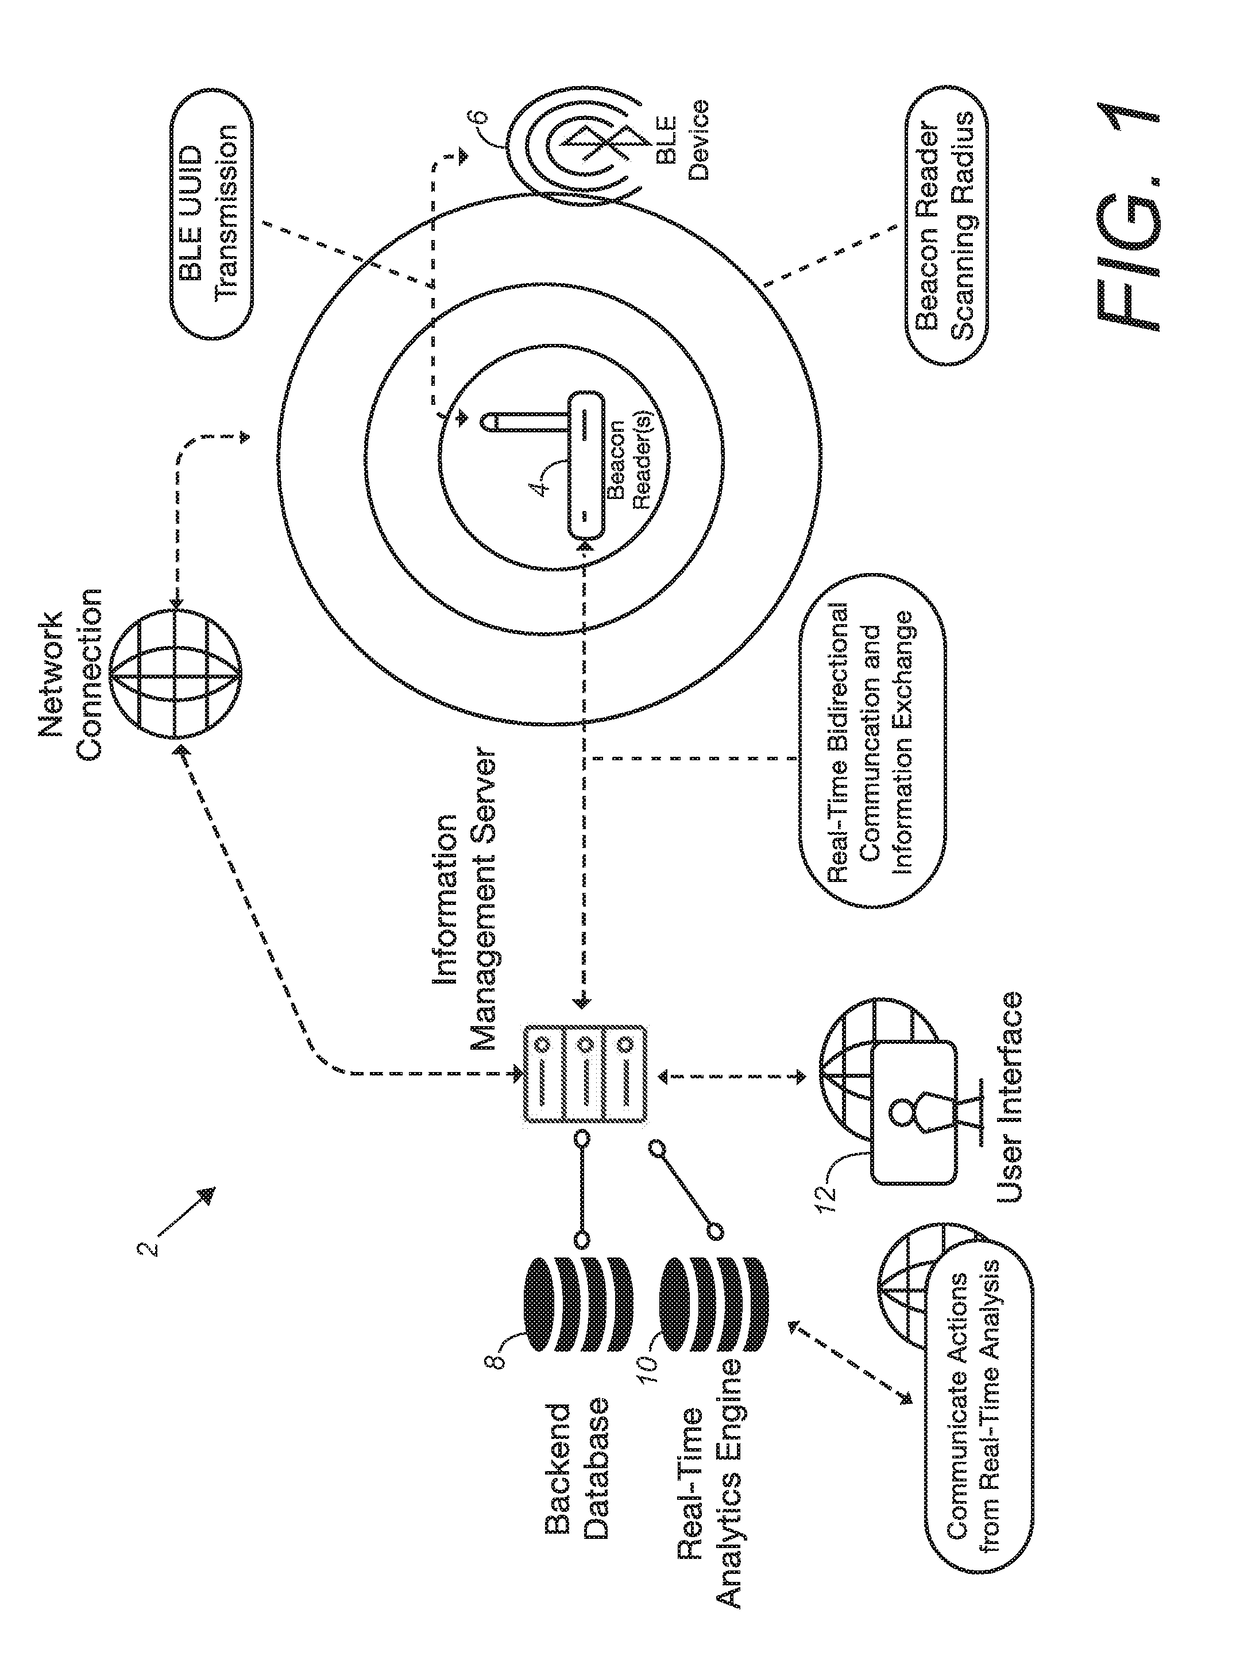 Electronic beacon reader system and method